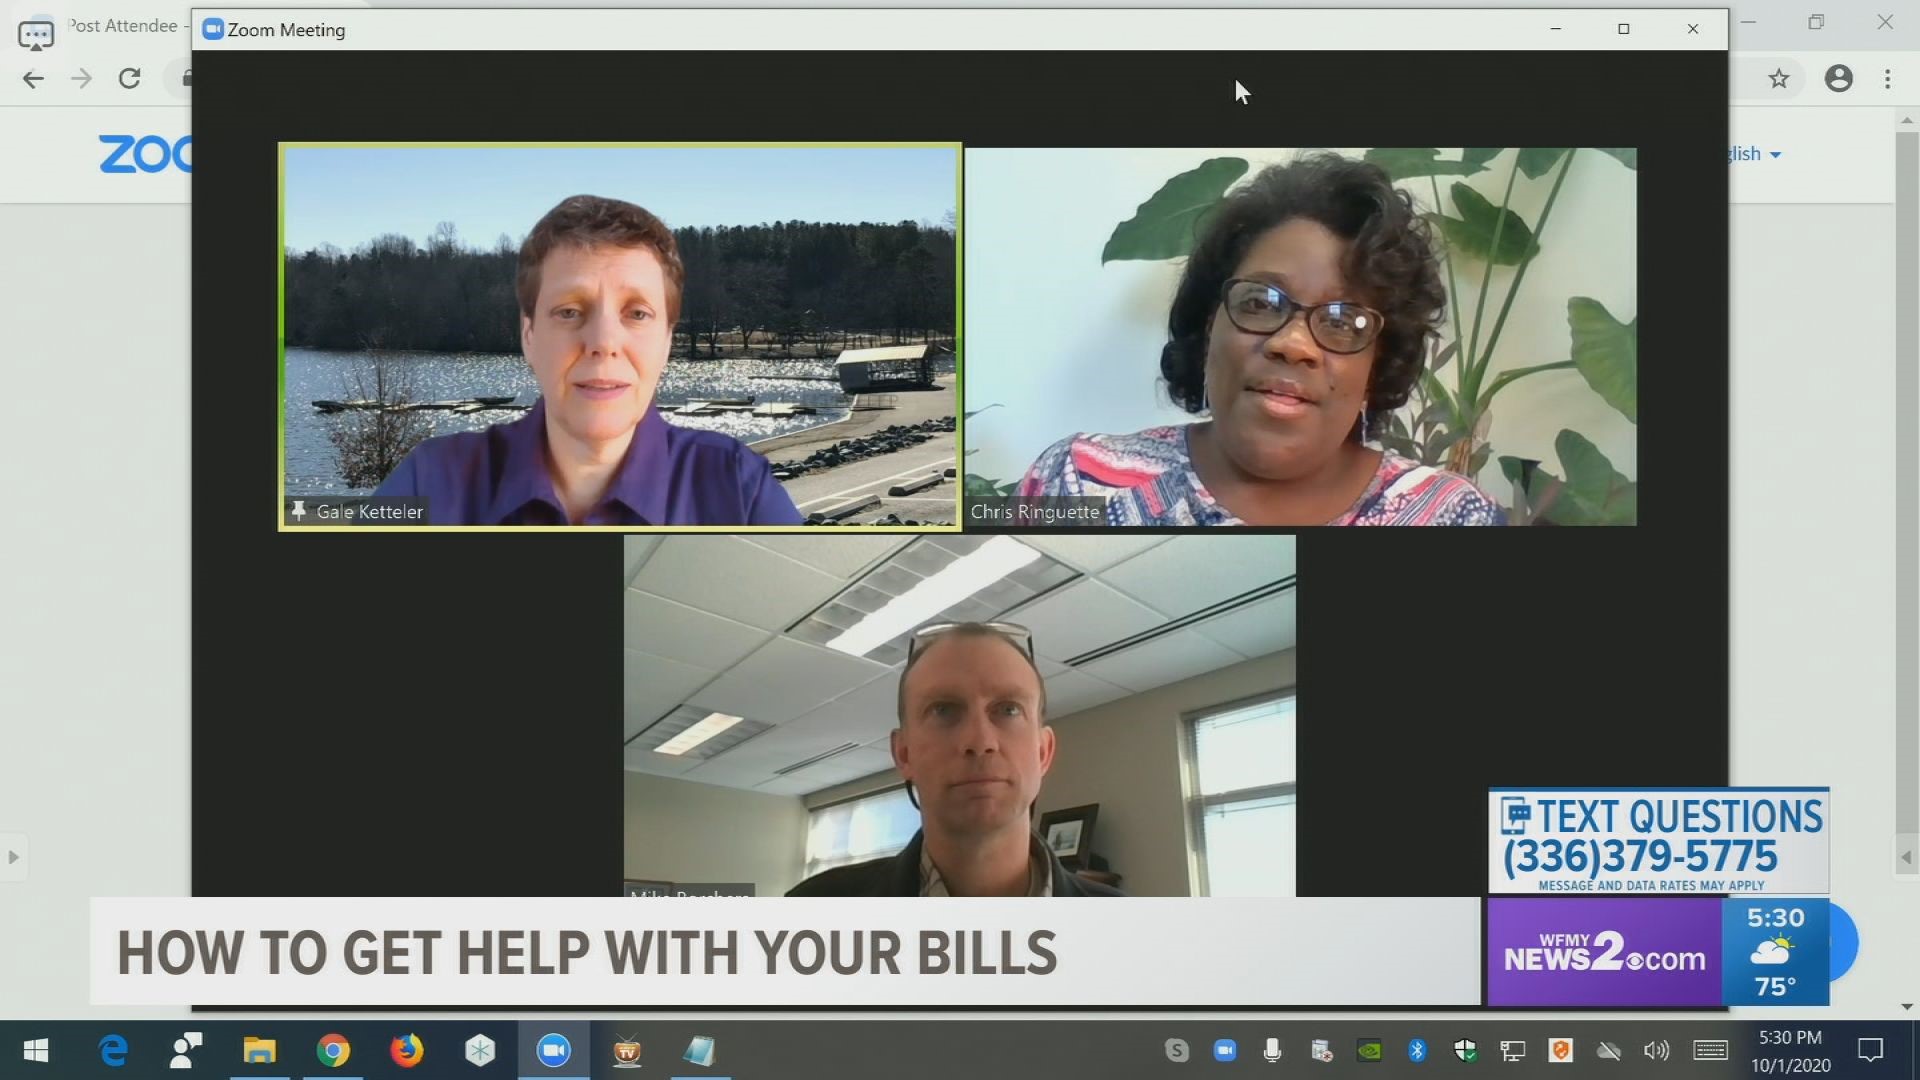 Many are struggling during this pandemic. You have options if you're behind on your bills.